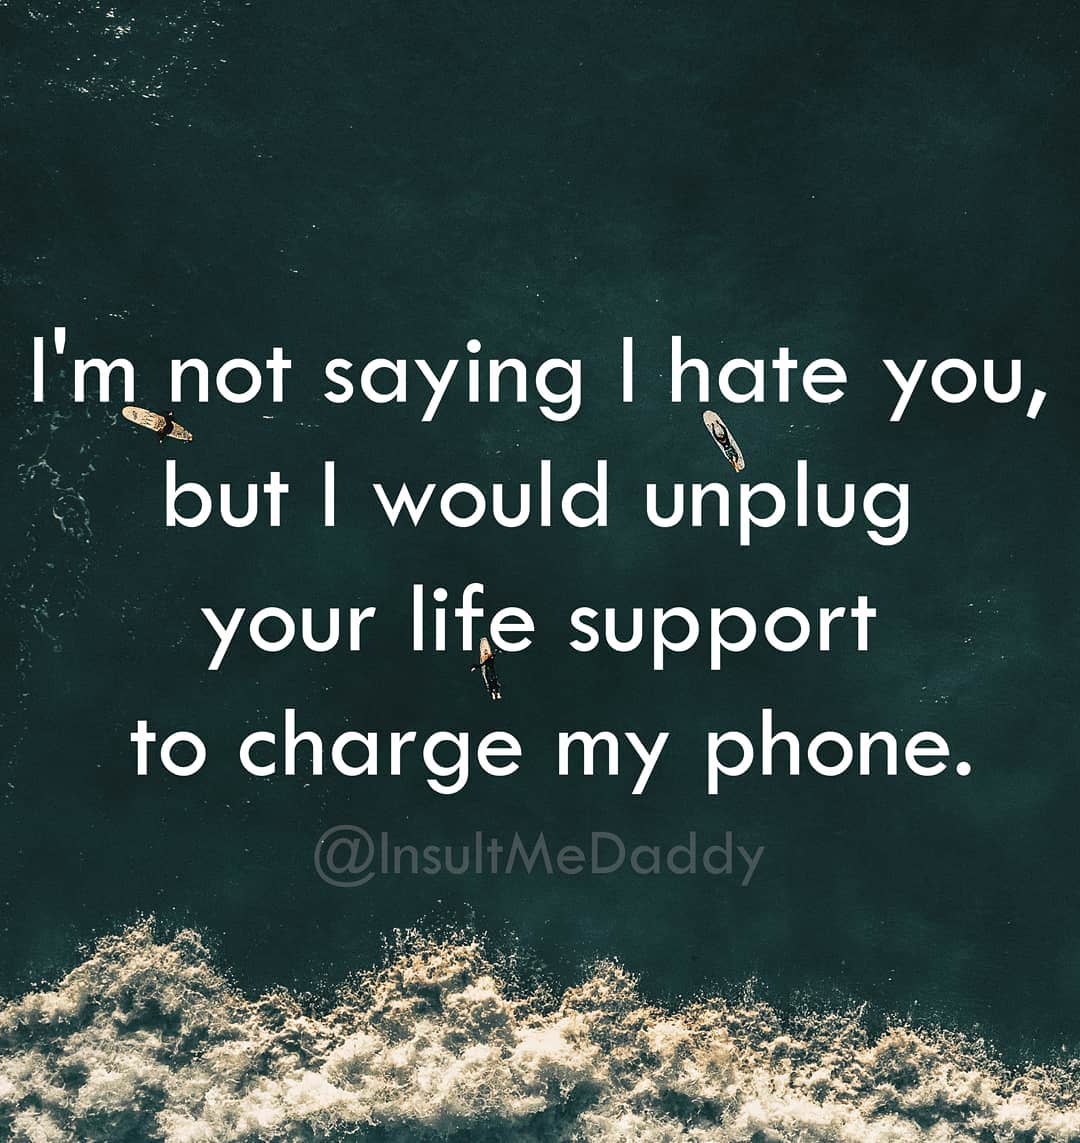 savage insult - I'm not saying I hate you, but I would unplug your life support to charge my phone.